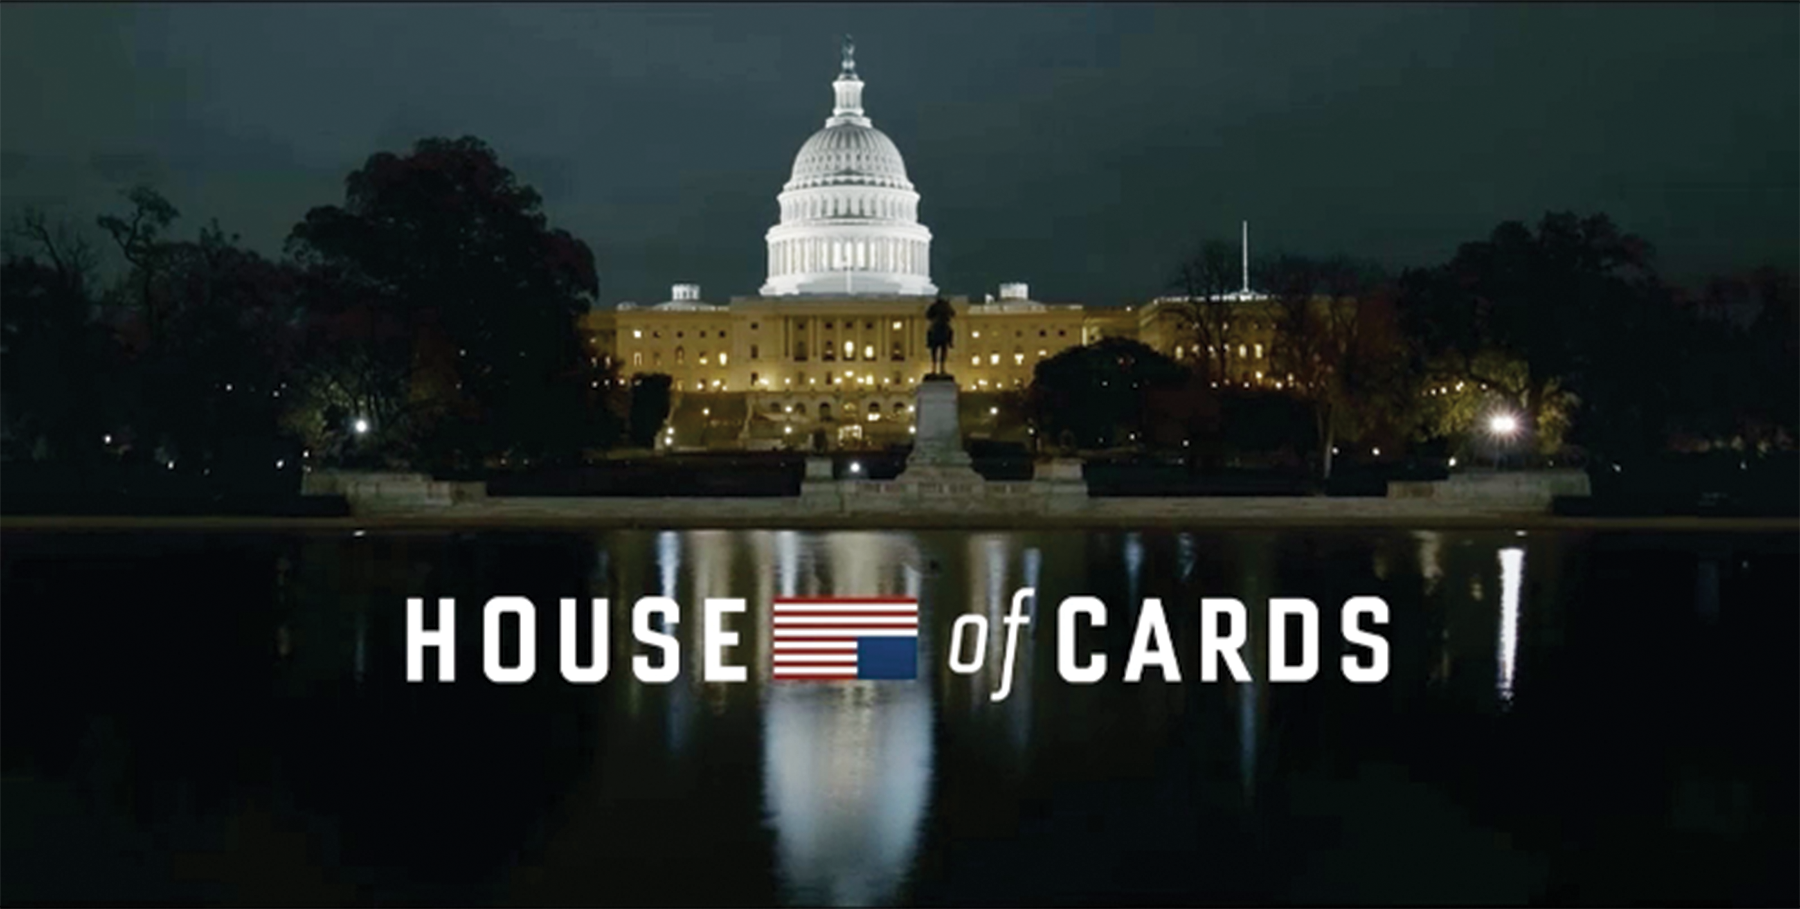 Composition of Place in House of Cards